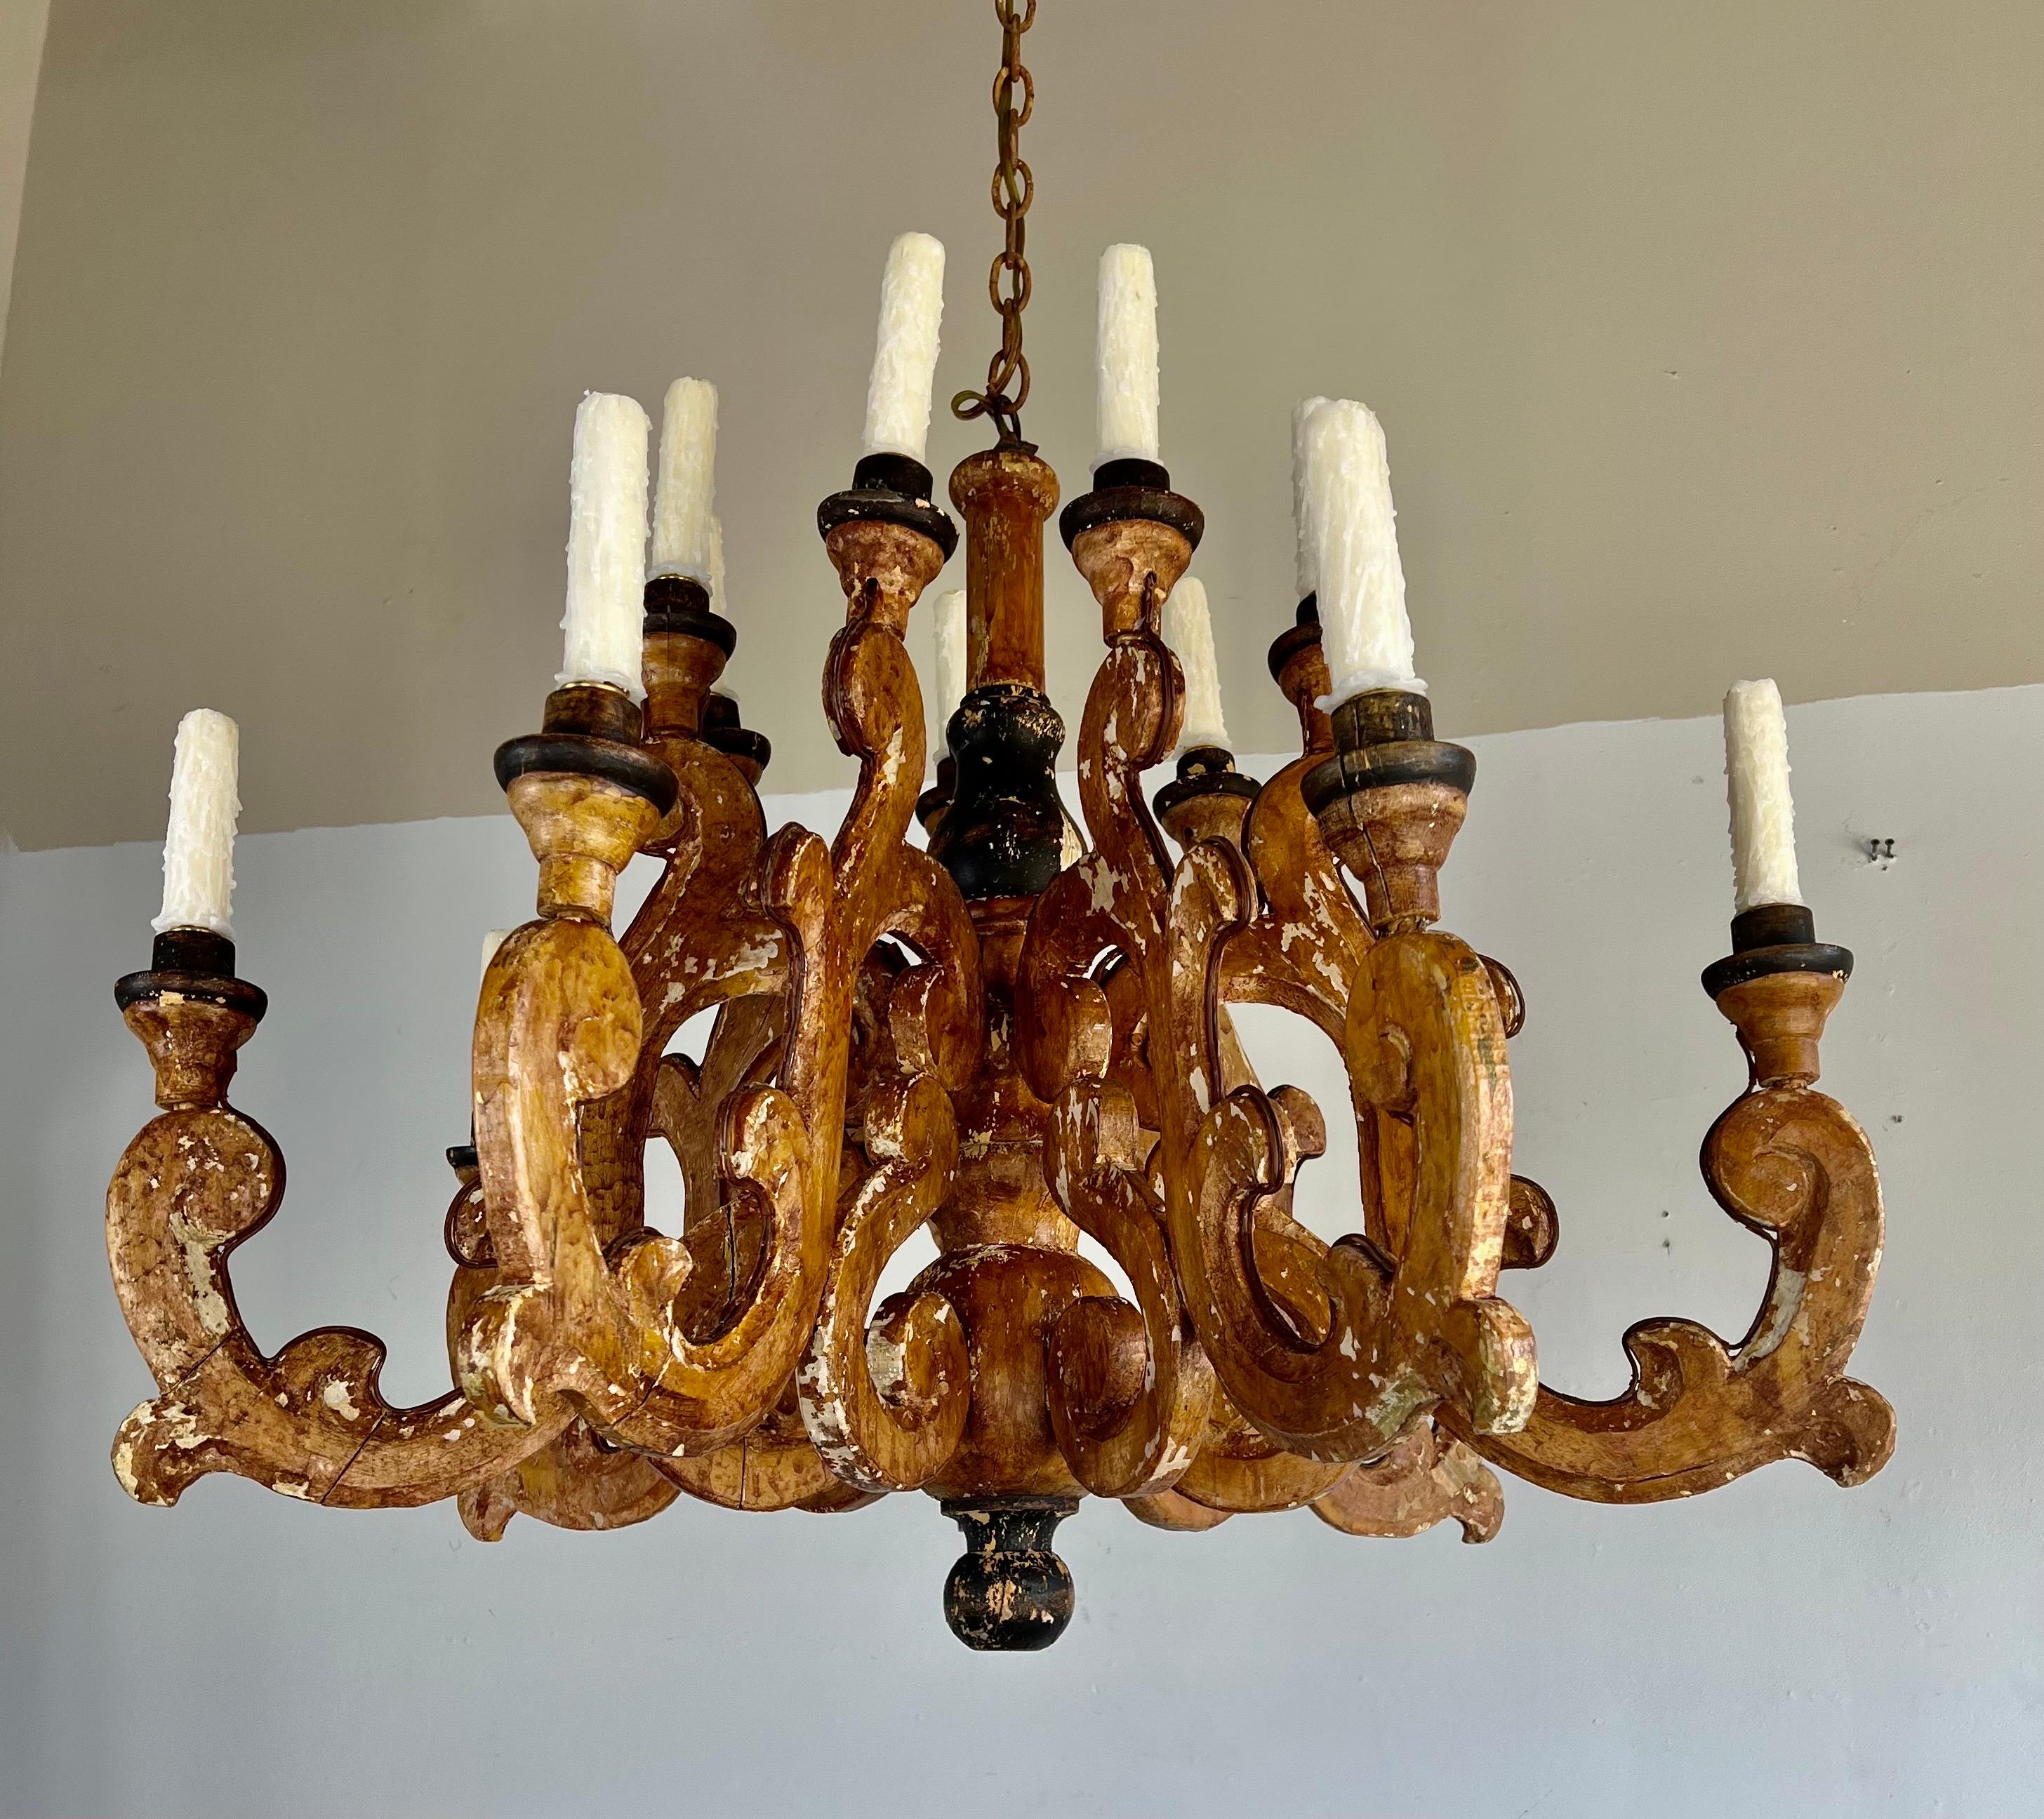 (14) Light painted italian baroque style chandelier. The chandelier has been newly wired with drip wax candle covers. We have added chain & canopy as well.